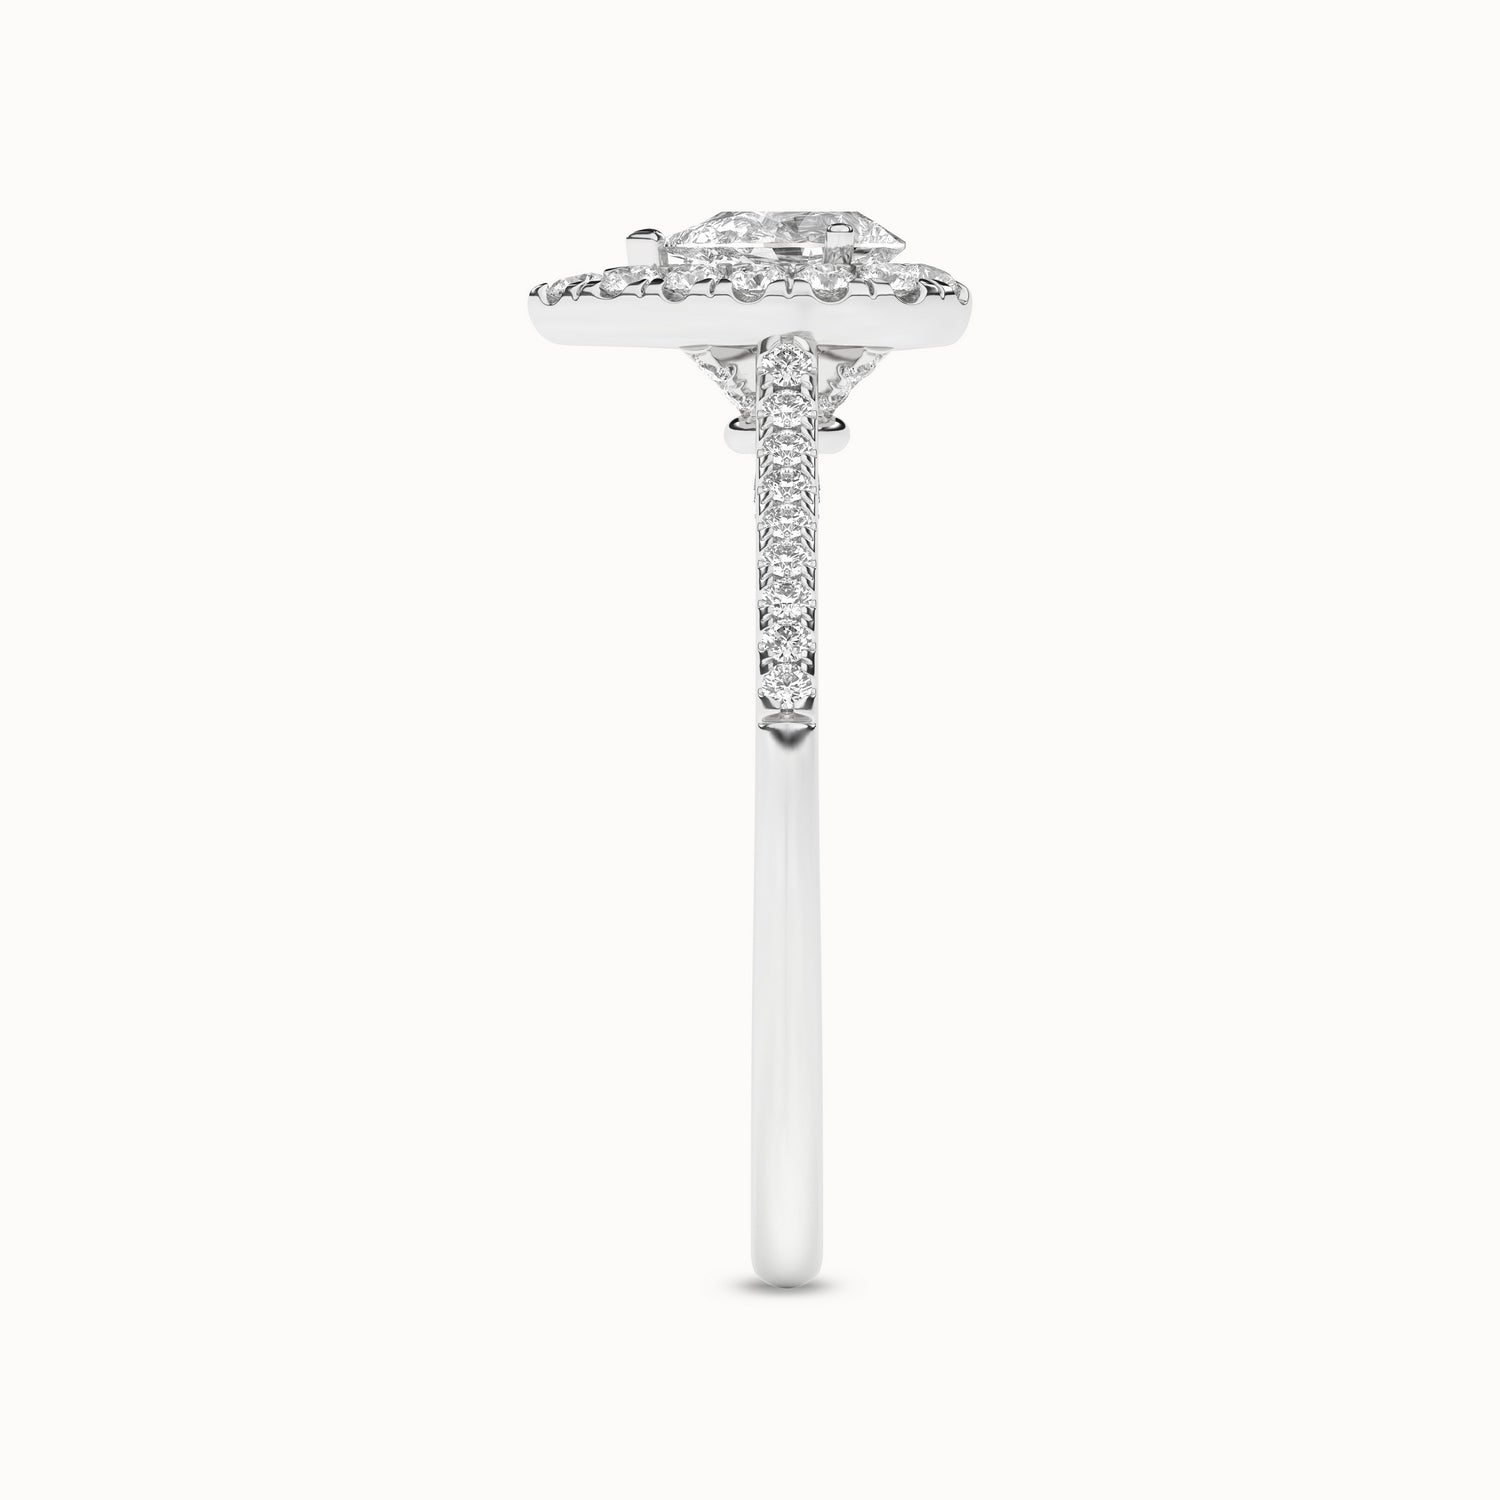 Signature Dewdrop Halo Ring_Product Angle_3/4Ct - 4